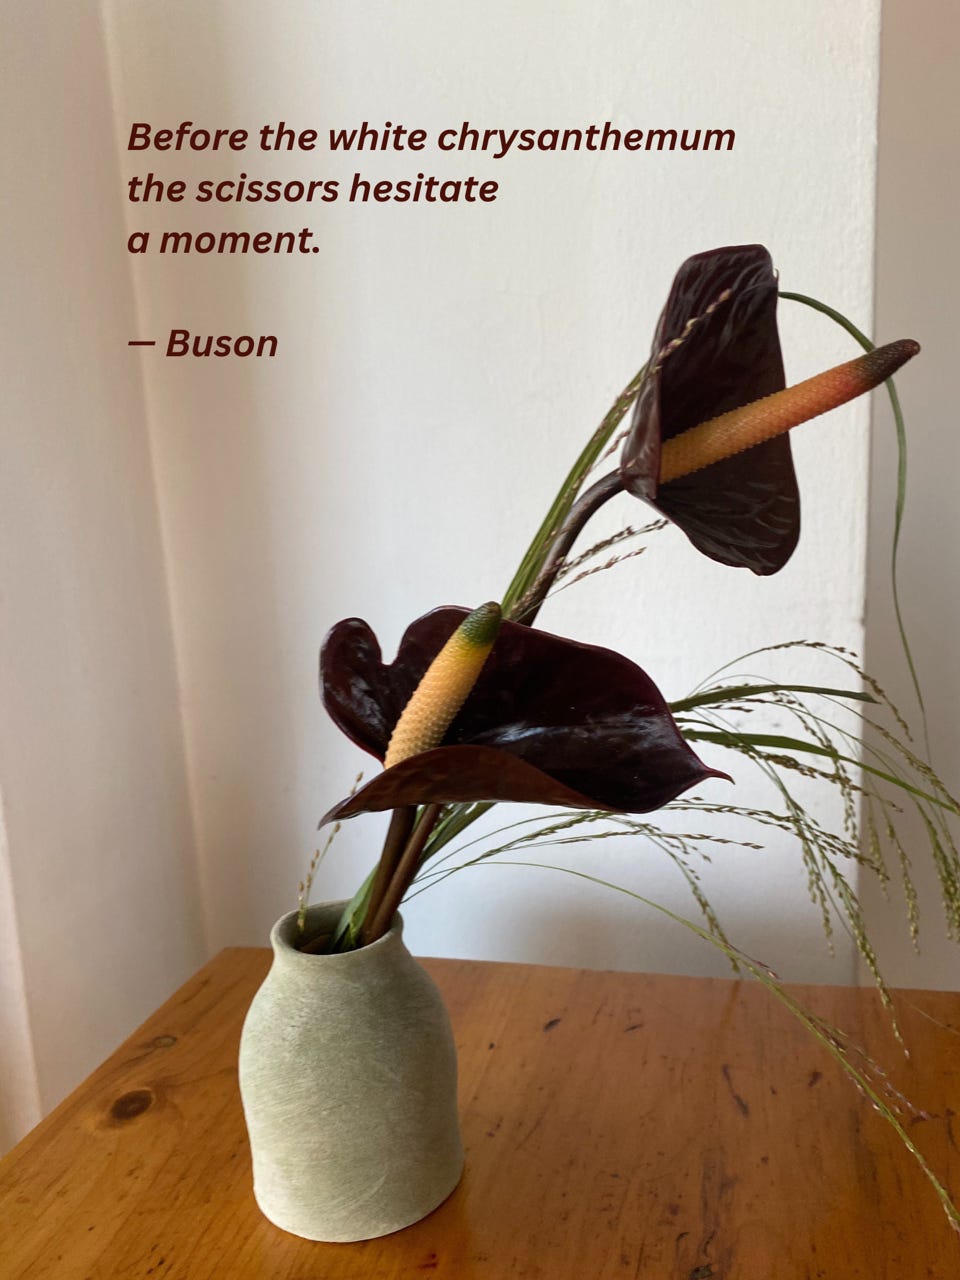 A photograph of an elegant arrangement of anthurium flowers and grasses. A haiku poem is overlaid: Before the white chrysanthemum/the scissors hesitate/a moment—Buson